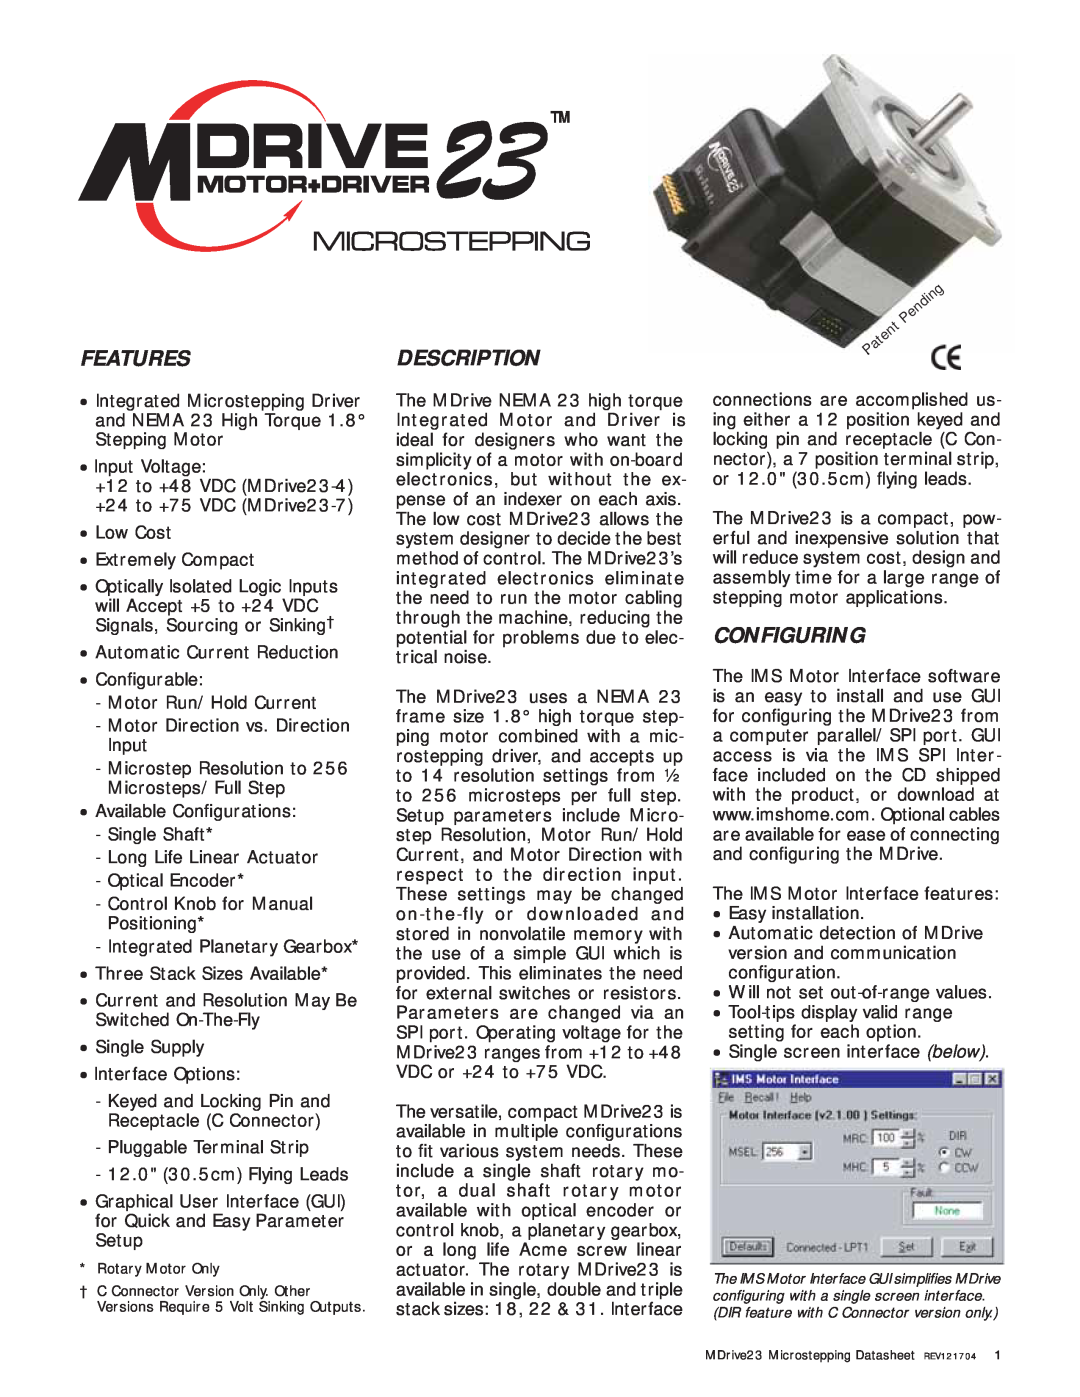 Intelligent Motion Systems MDrive23 manual Featuresdescription, Configuring, Microstepping 